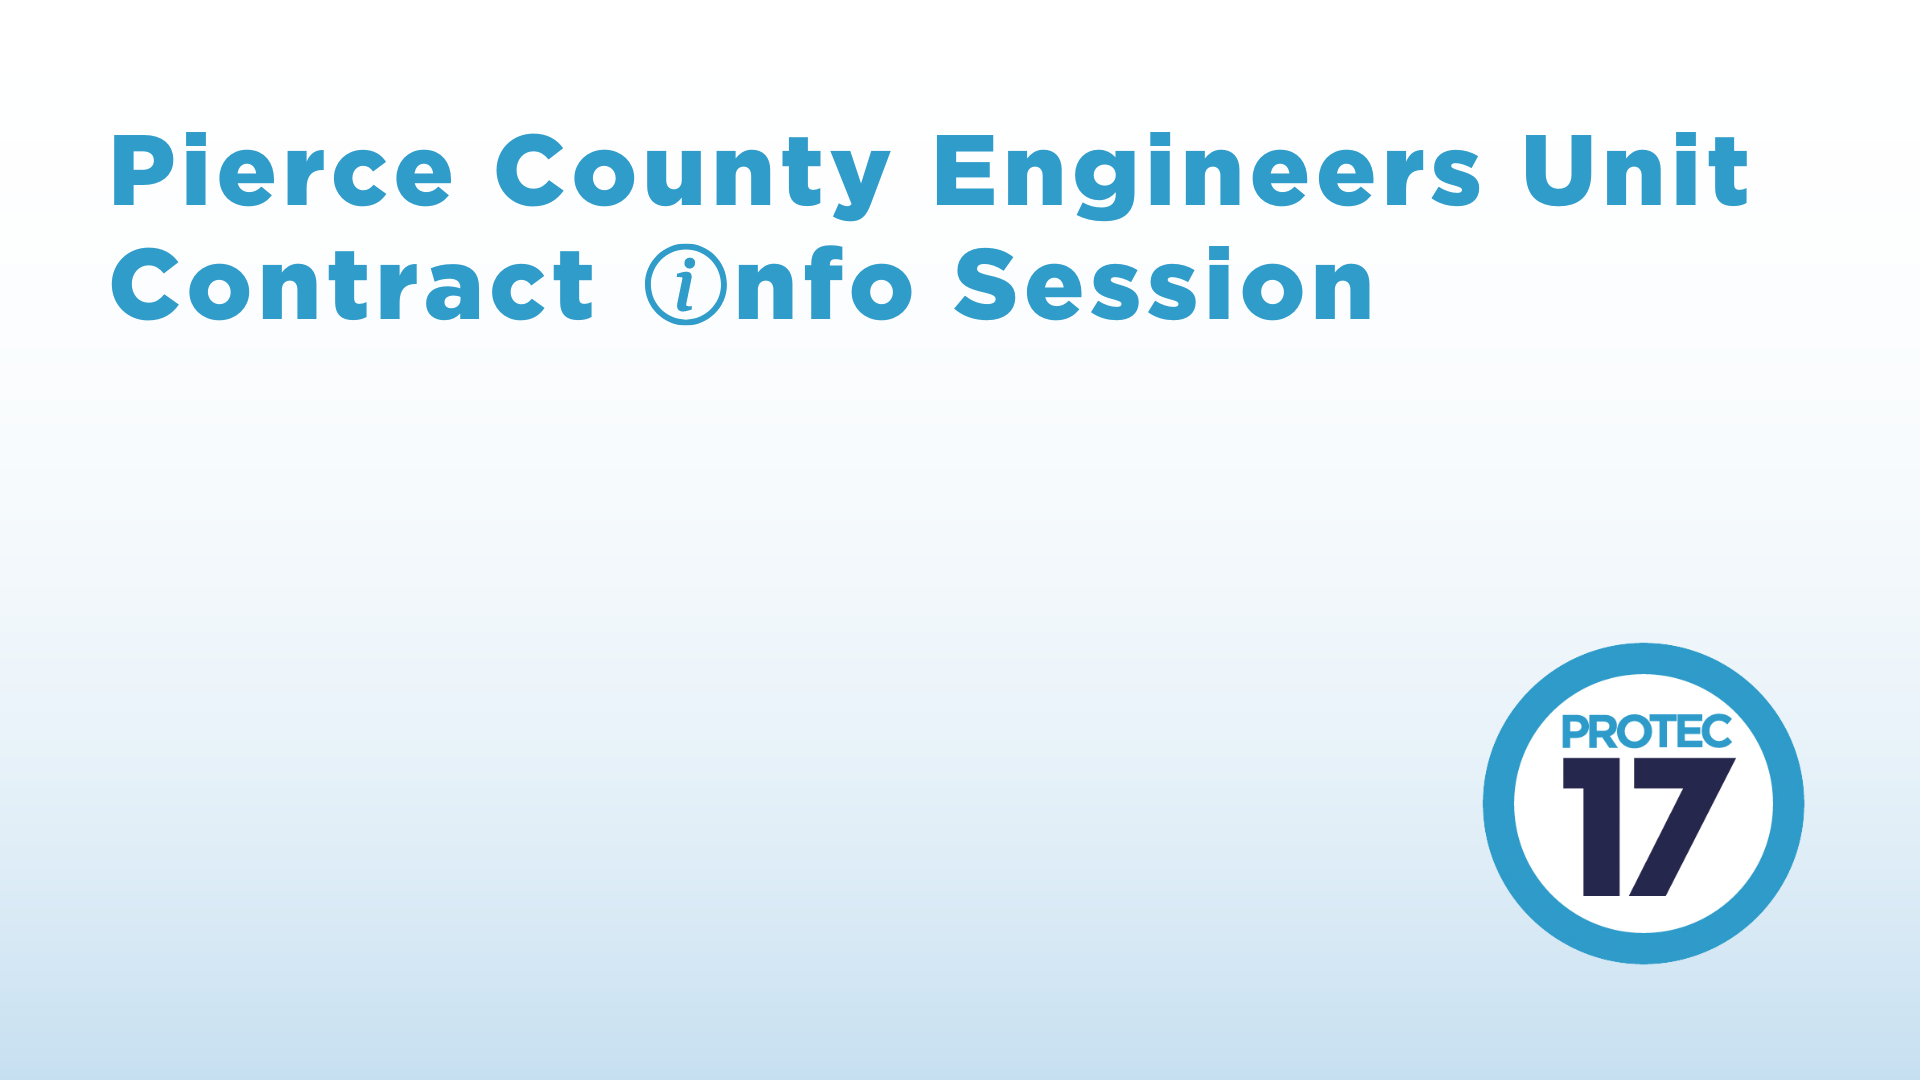 The text reads, "Pierce County Engineers Unit Contract Info Session" where the "I" in info is n info symbol. The PROTEC17 logo is in the bottom right and the background is a gradient from blue to white (from bottom to top).